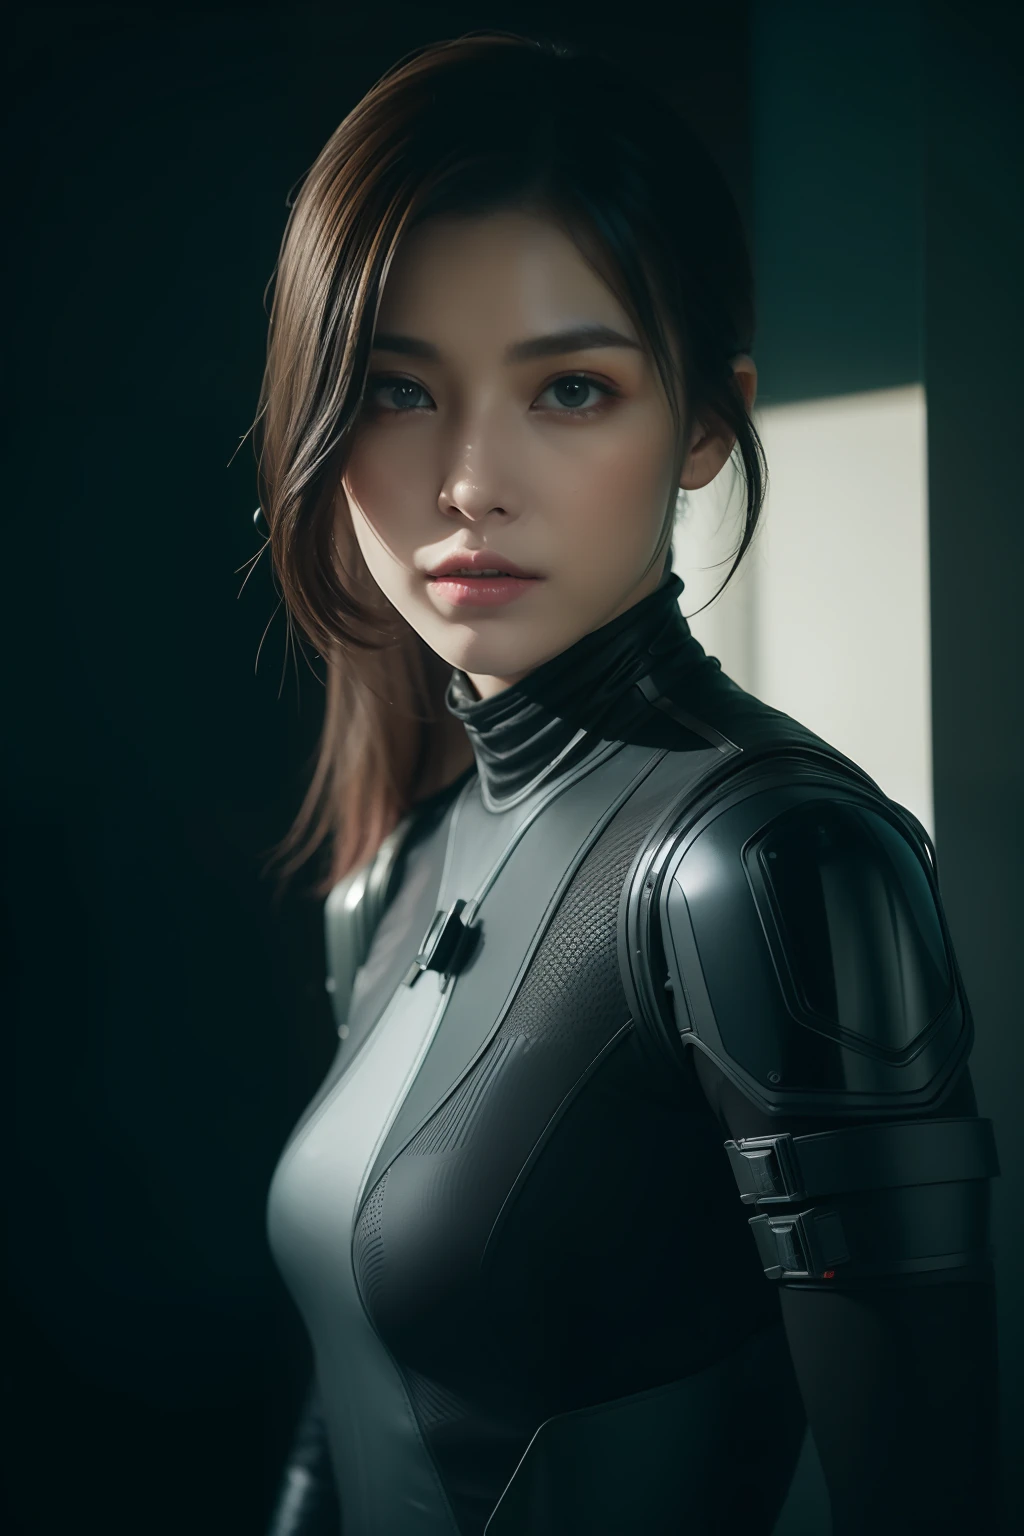 3D, A beautiful cyberpunk female image,hdr（HighDynamicRange）,Ray traching,NVIDIA RTX,Hyper-Resolution,Unreal 5,Subsurface scattering、PBR Texture、post-proces、Anisotropy Filtering、depth of fieldaximum definition and sharpnesany-Layer Textures、Albedo e mapas Speculares、Surface coloring、Accurate simulation octane rendering of light-material interactions、Two-colored light、largeaperture、Low ISO、White balance、the rule of thirds、8K raw data、blackstockings